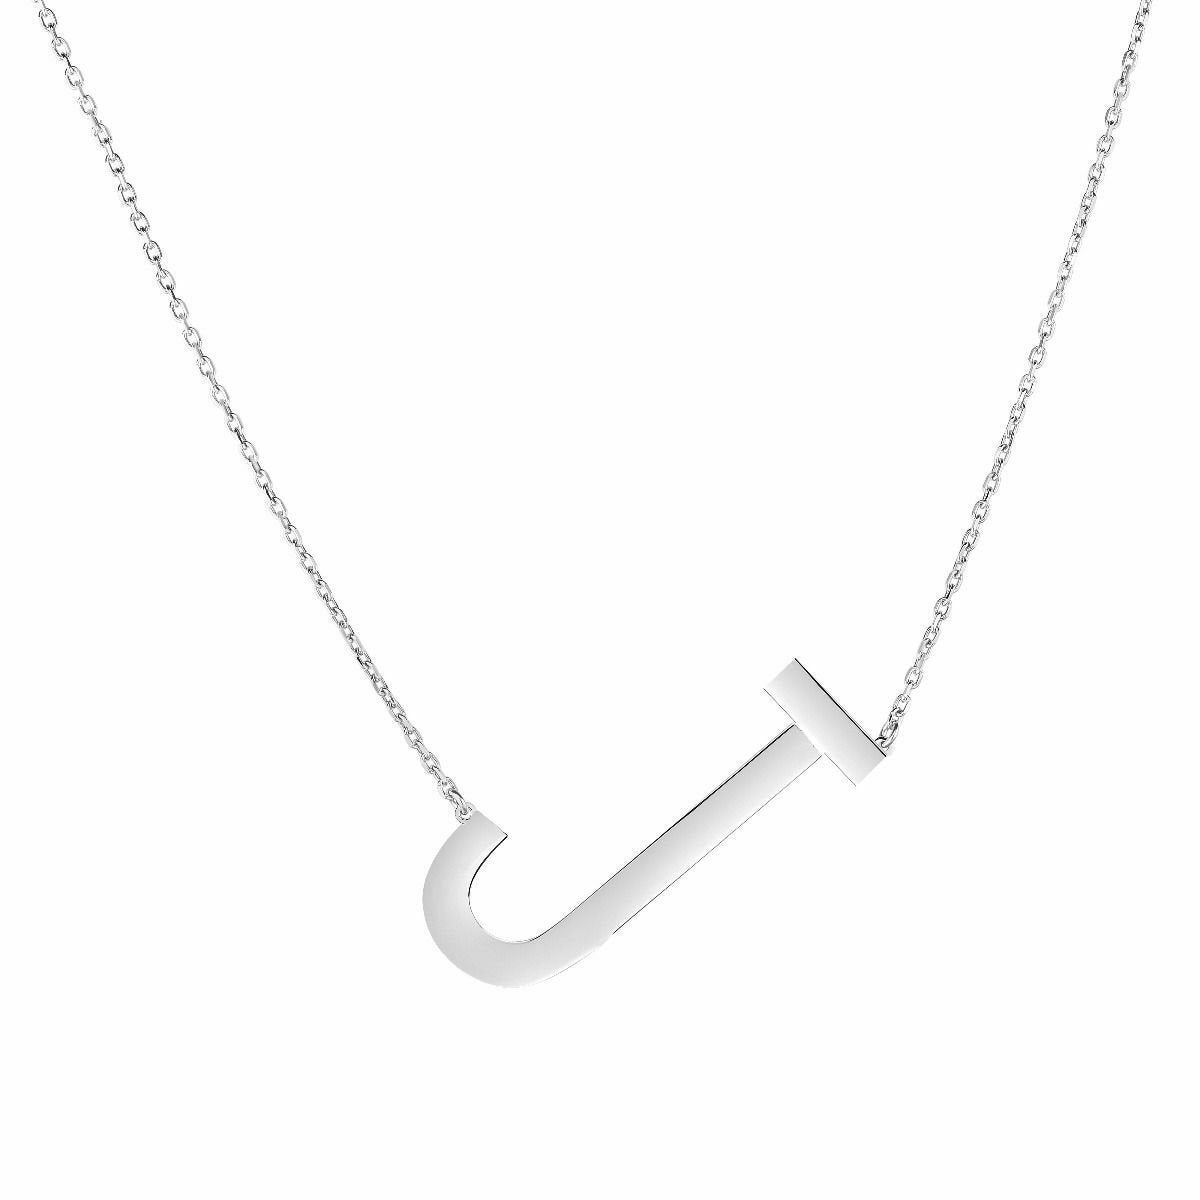 Initial Pendent Necklace Charm Letter J Finished in Pure Platinum - CRISLU